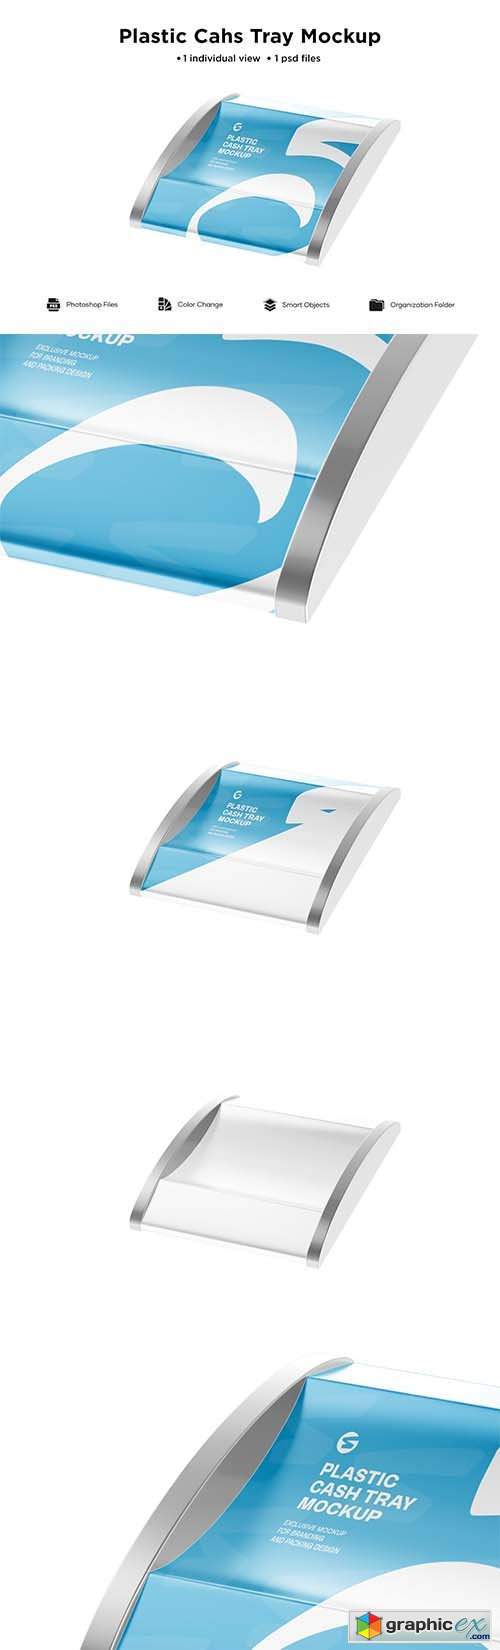 Download Glossy Plastic Cash Tray Mockup Free Download Vector Stock Image Photoshop Icon